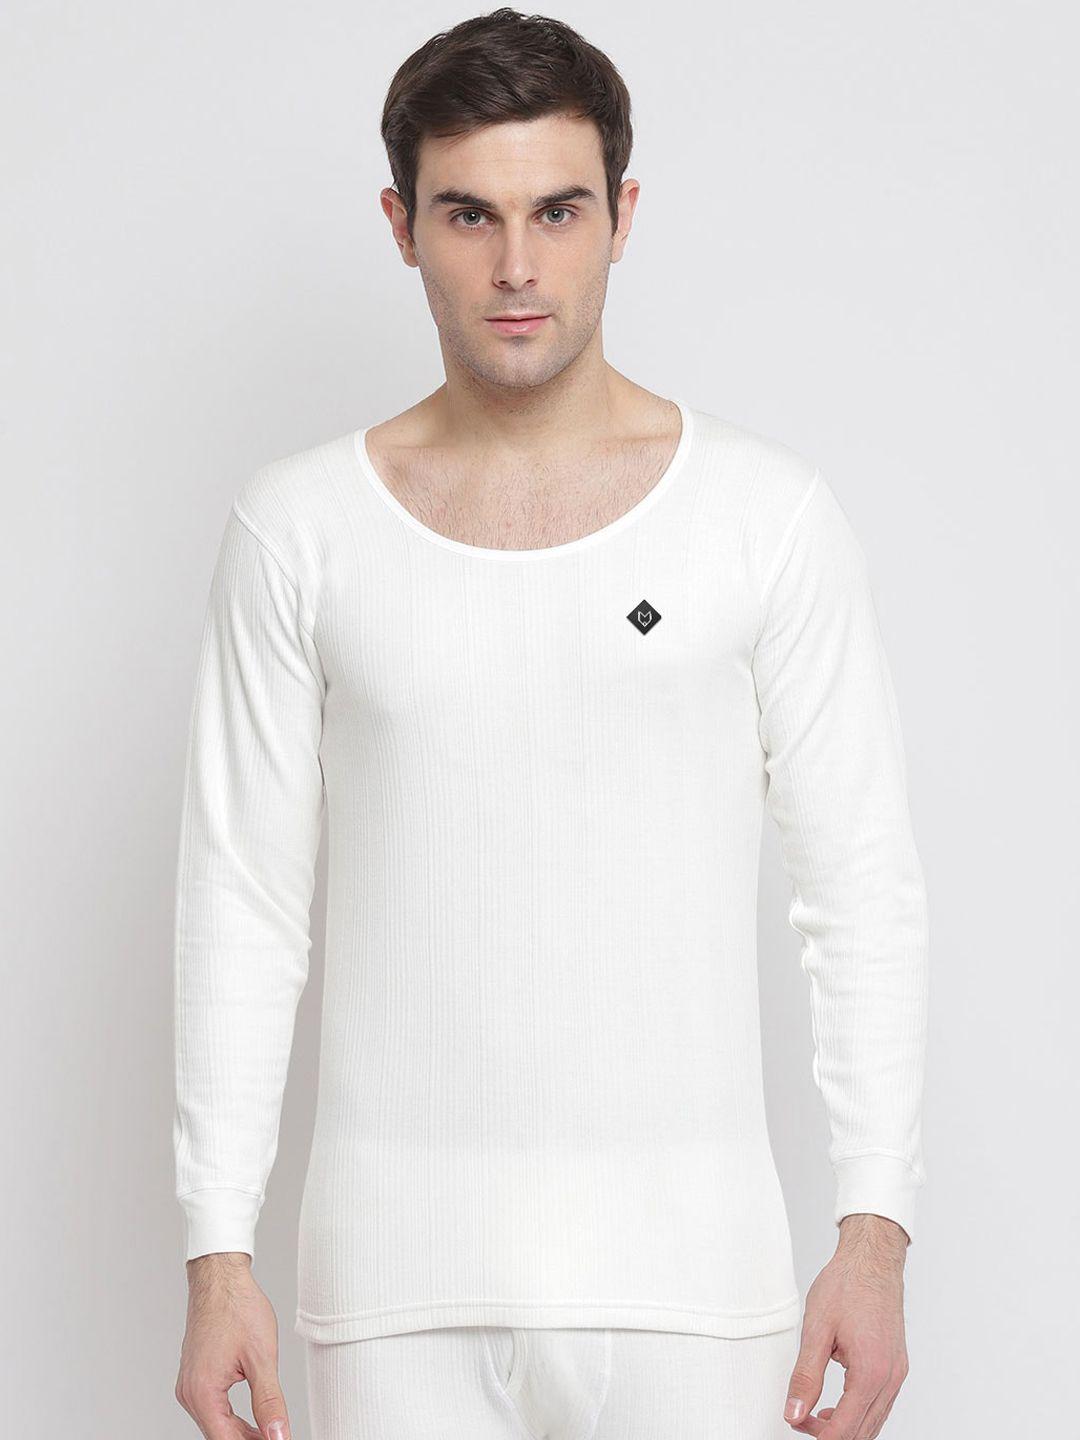 almo wear men off white solid cotton thermal tops